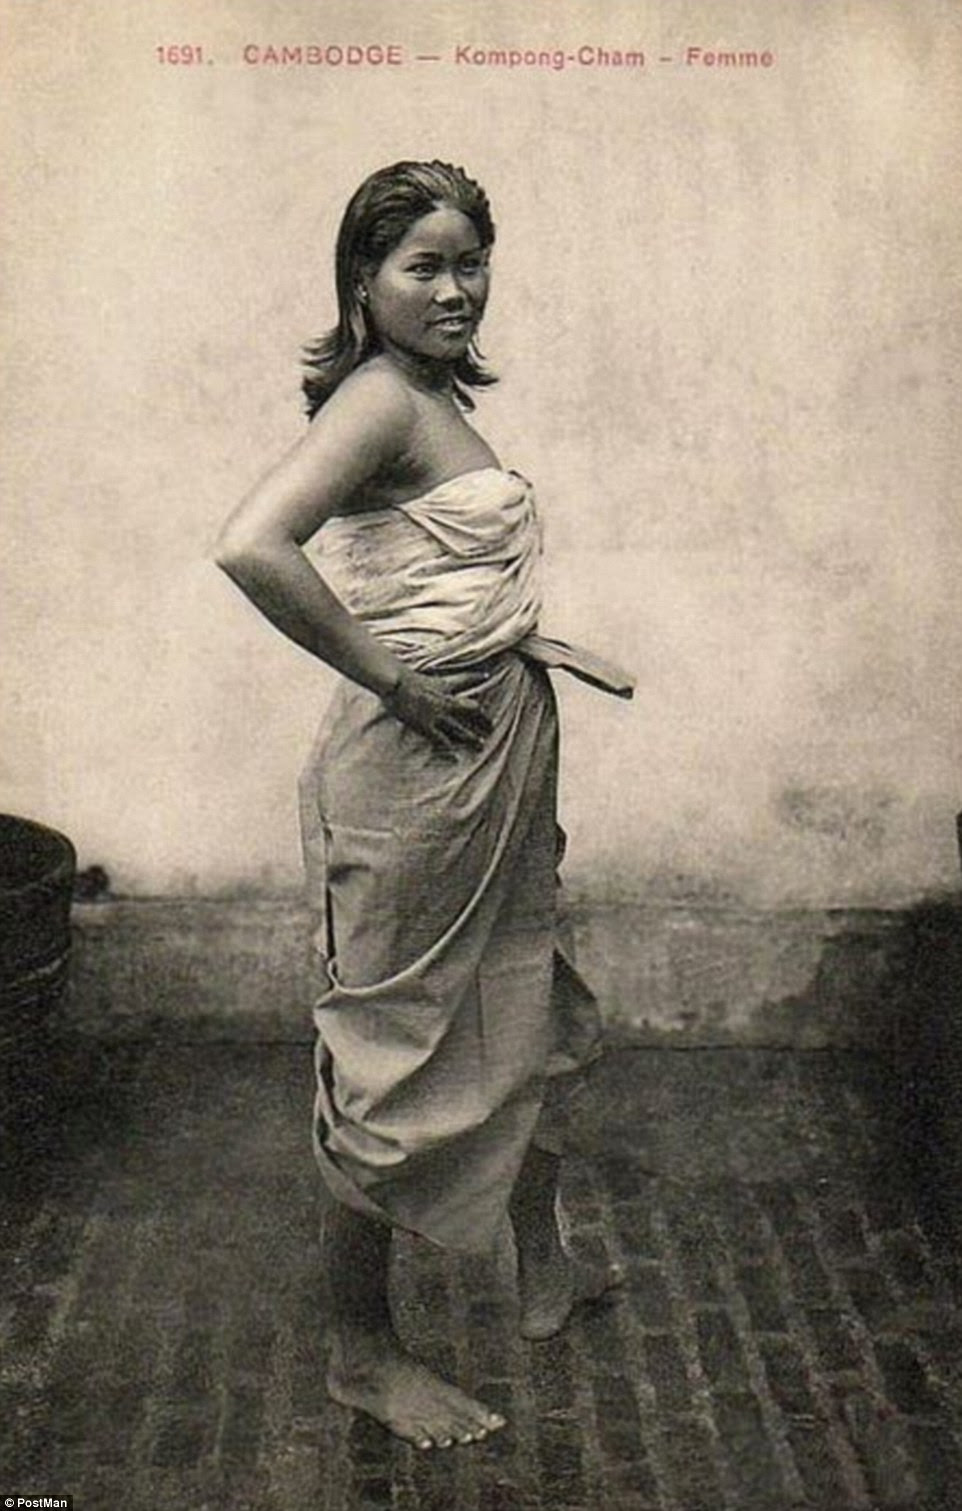 Worldwide style: A Cambodian woman pictured circa 1906 poses barefoot with an ill-fitting skirt and strapless top